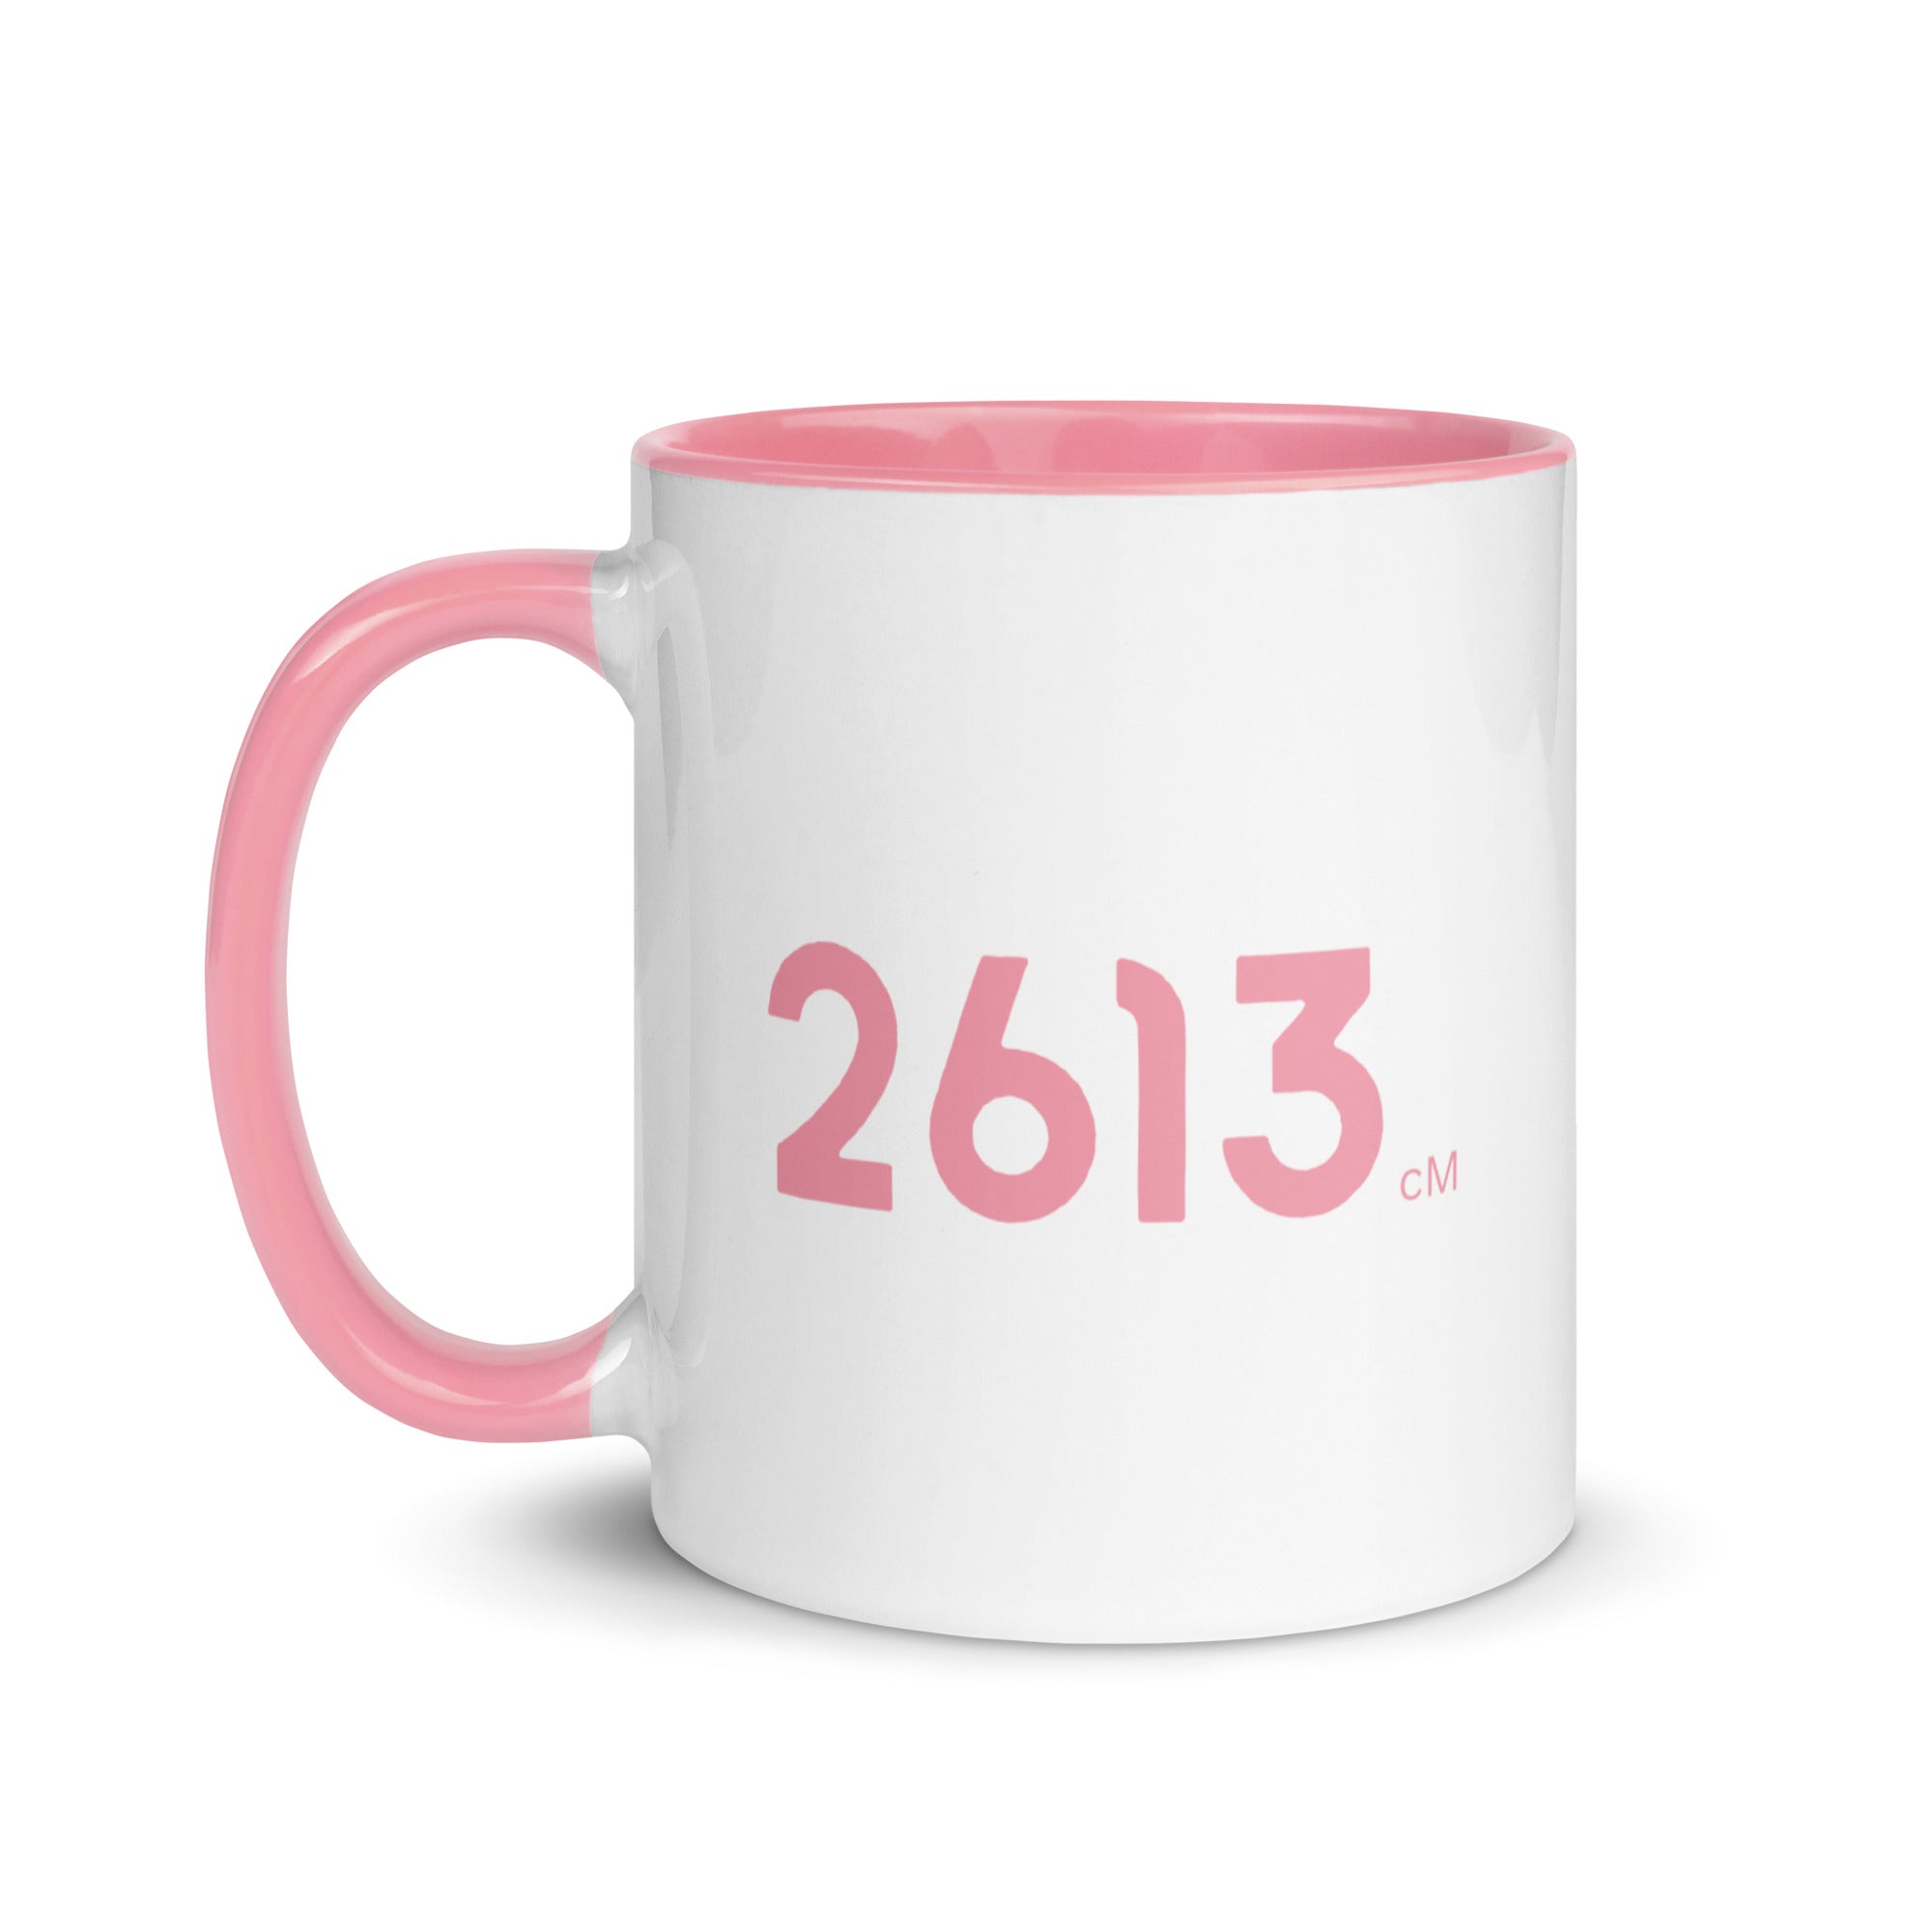 Genetic Genealogy "SIS" Mug with Color Inside Pink and White